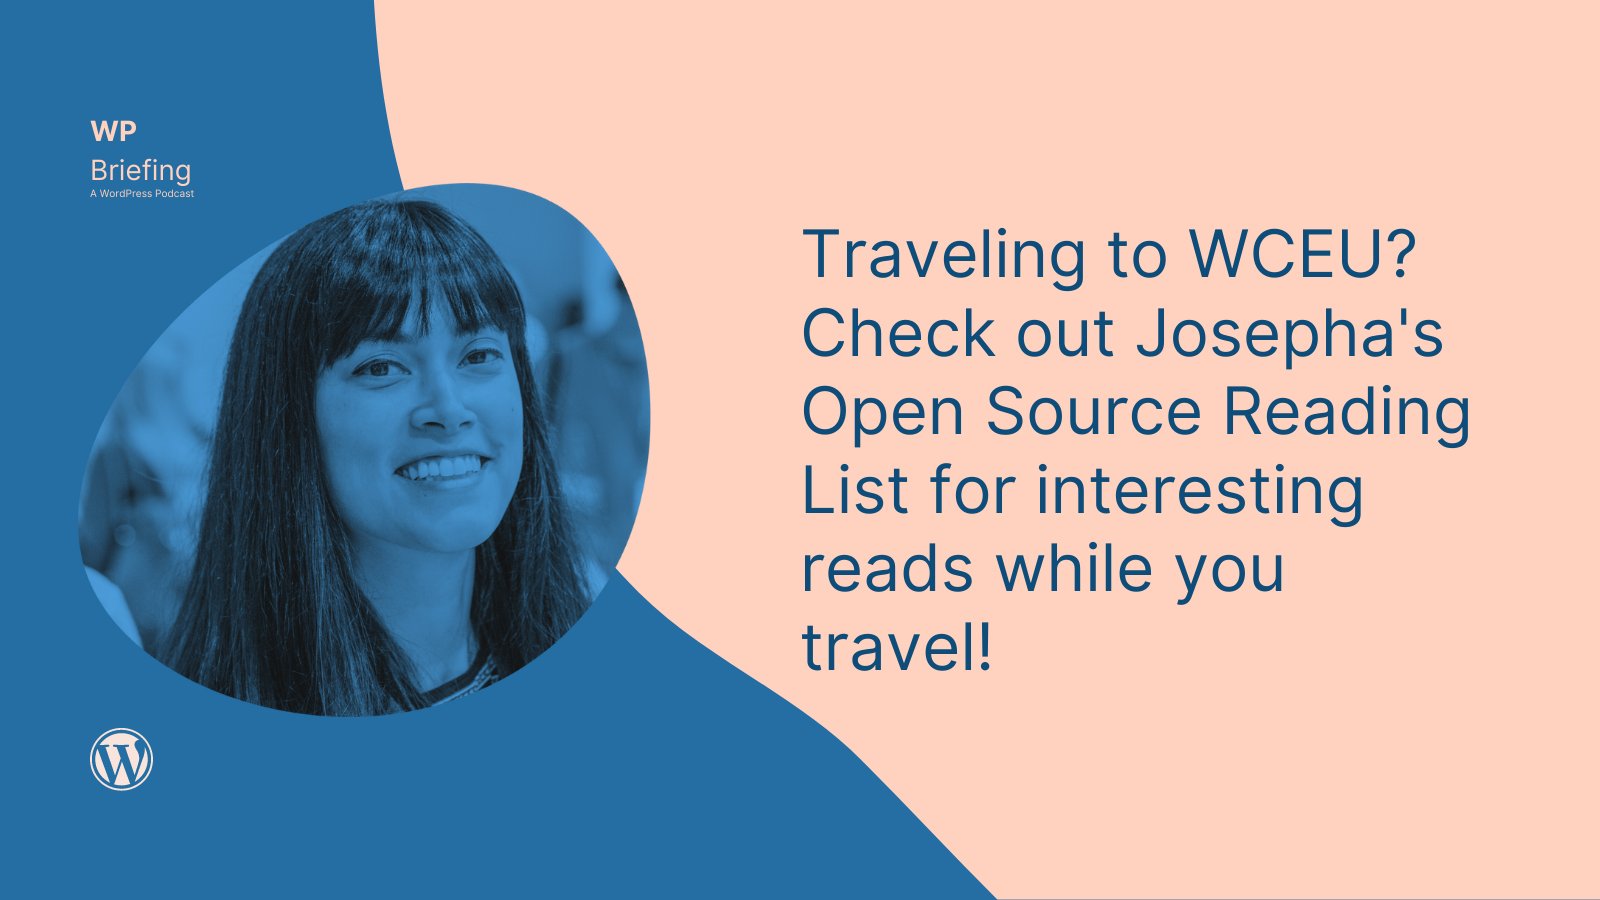 Text over image of Josepha Haden Chomphosy, "Traveling to WCEU? Check out Josepha's Open Source Reading List for interesting reads while you travel."